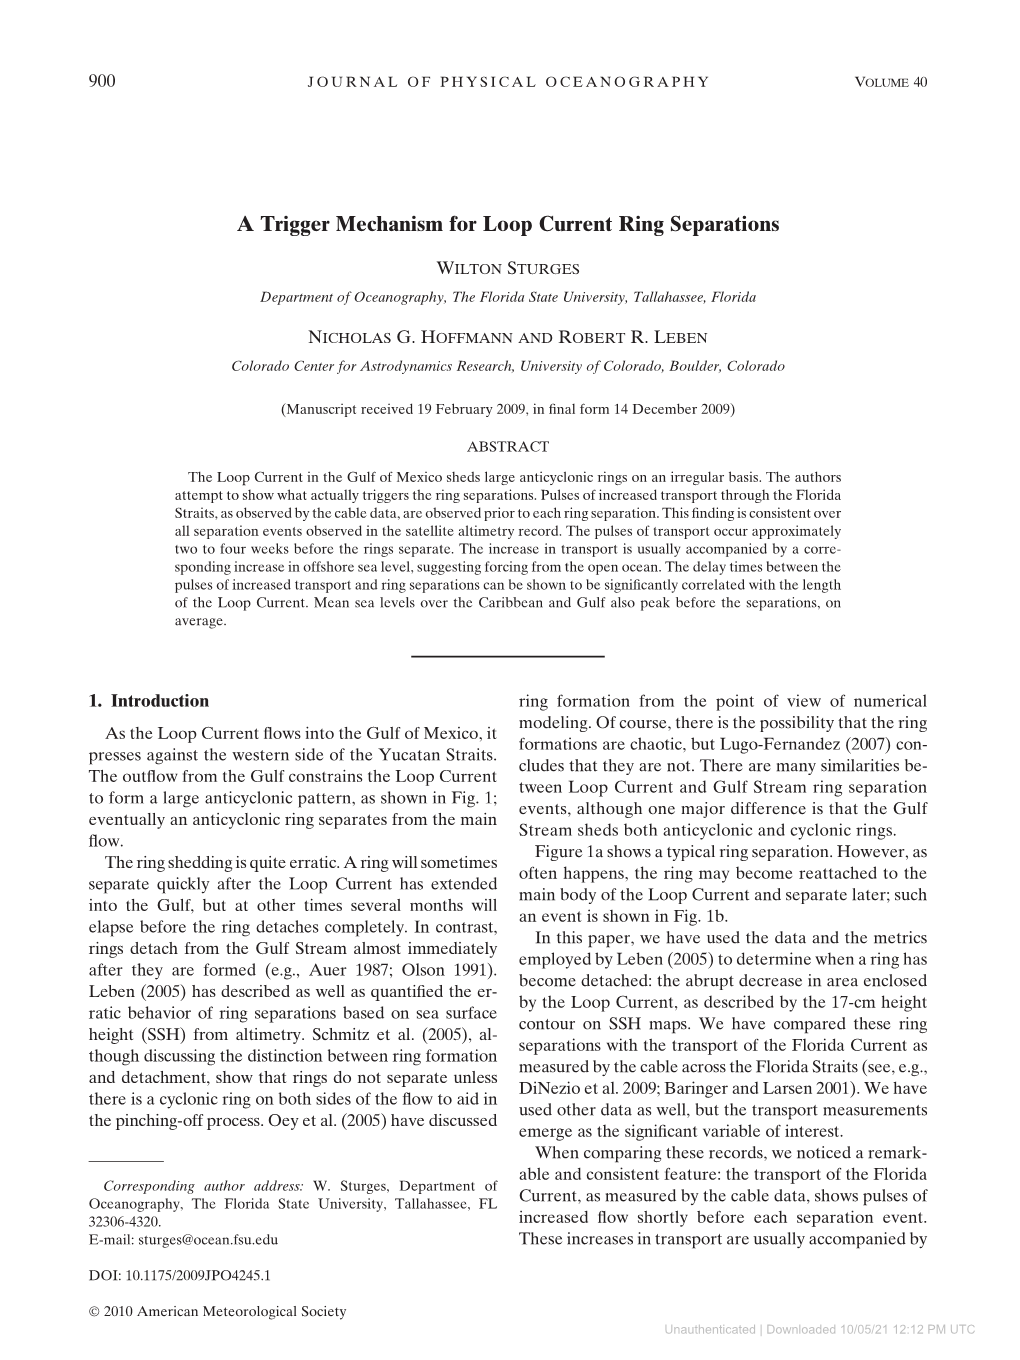 A Trigger Mechanism for Loop Current Ring Separations